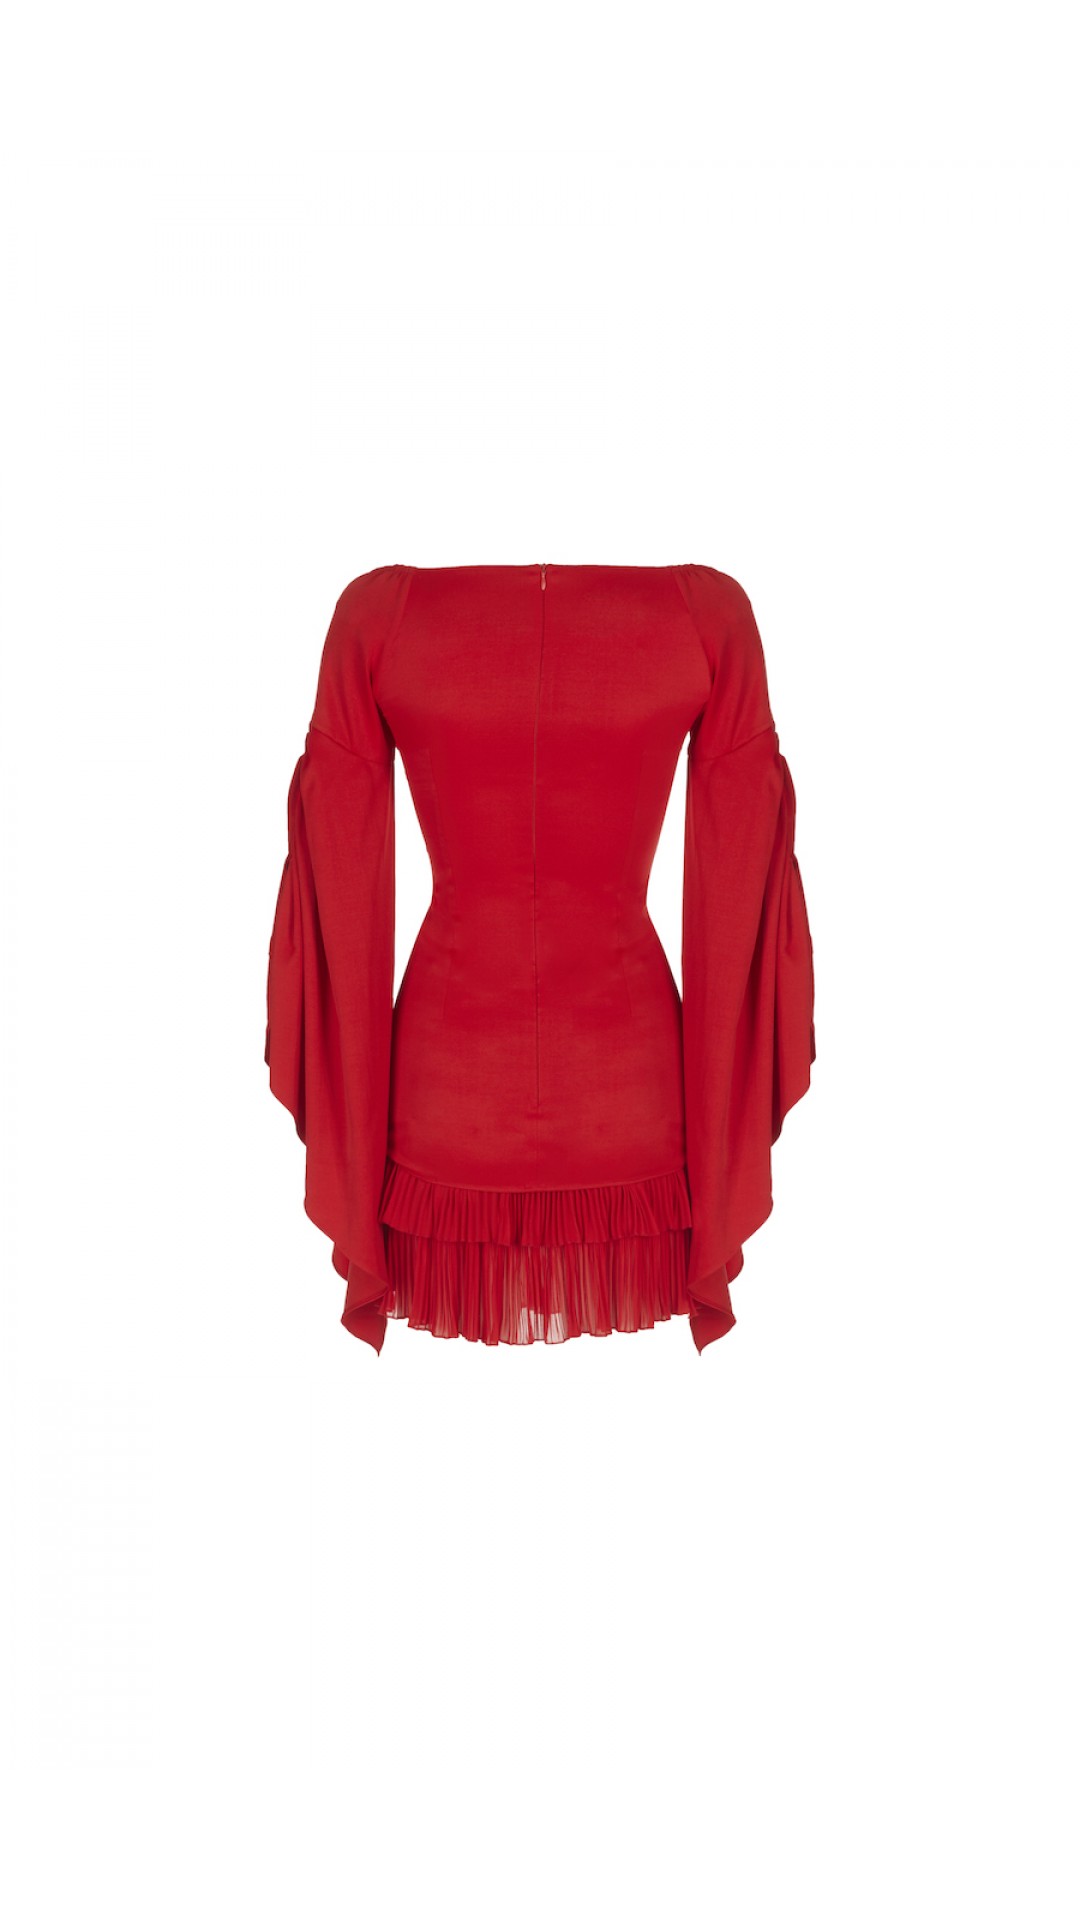 RED BLOUSE WITH RUFFLED ARM AND FRINGE DETAILS 